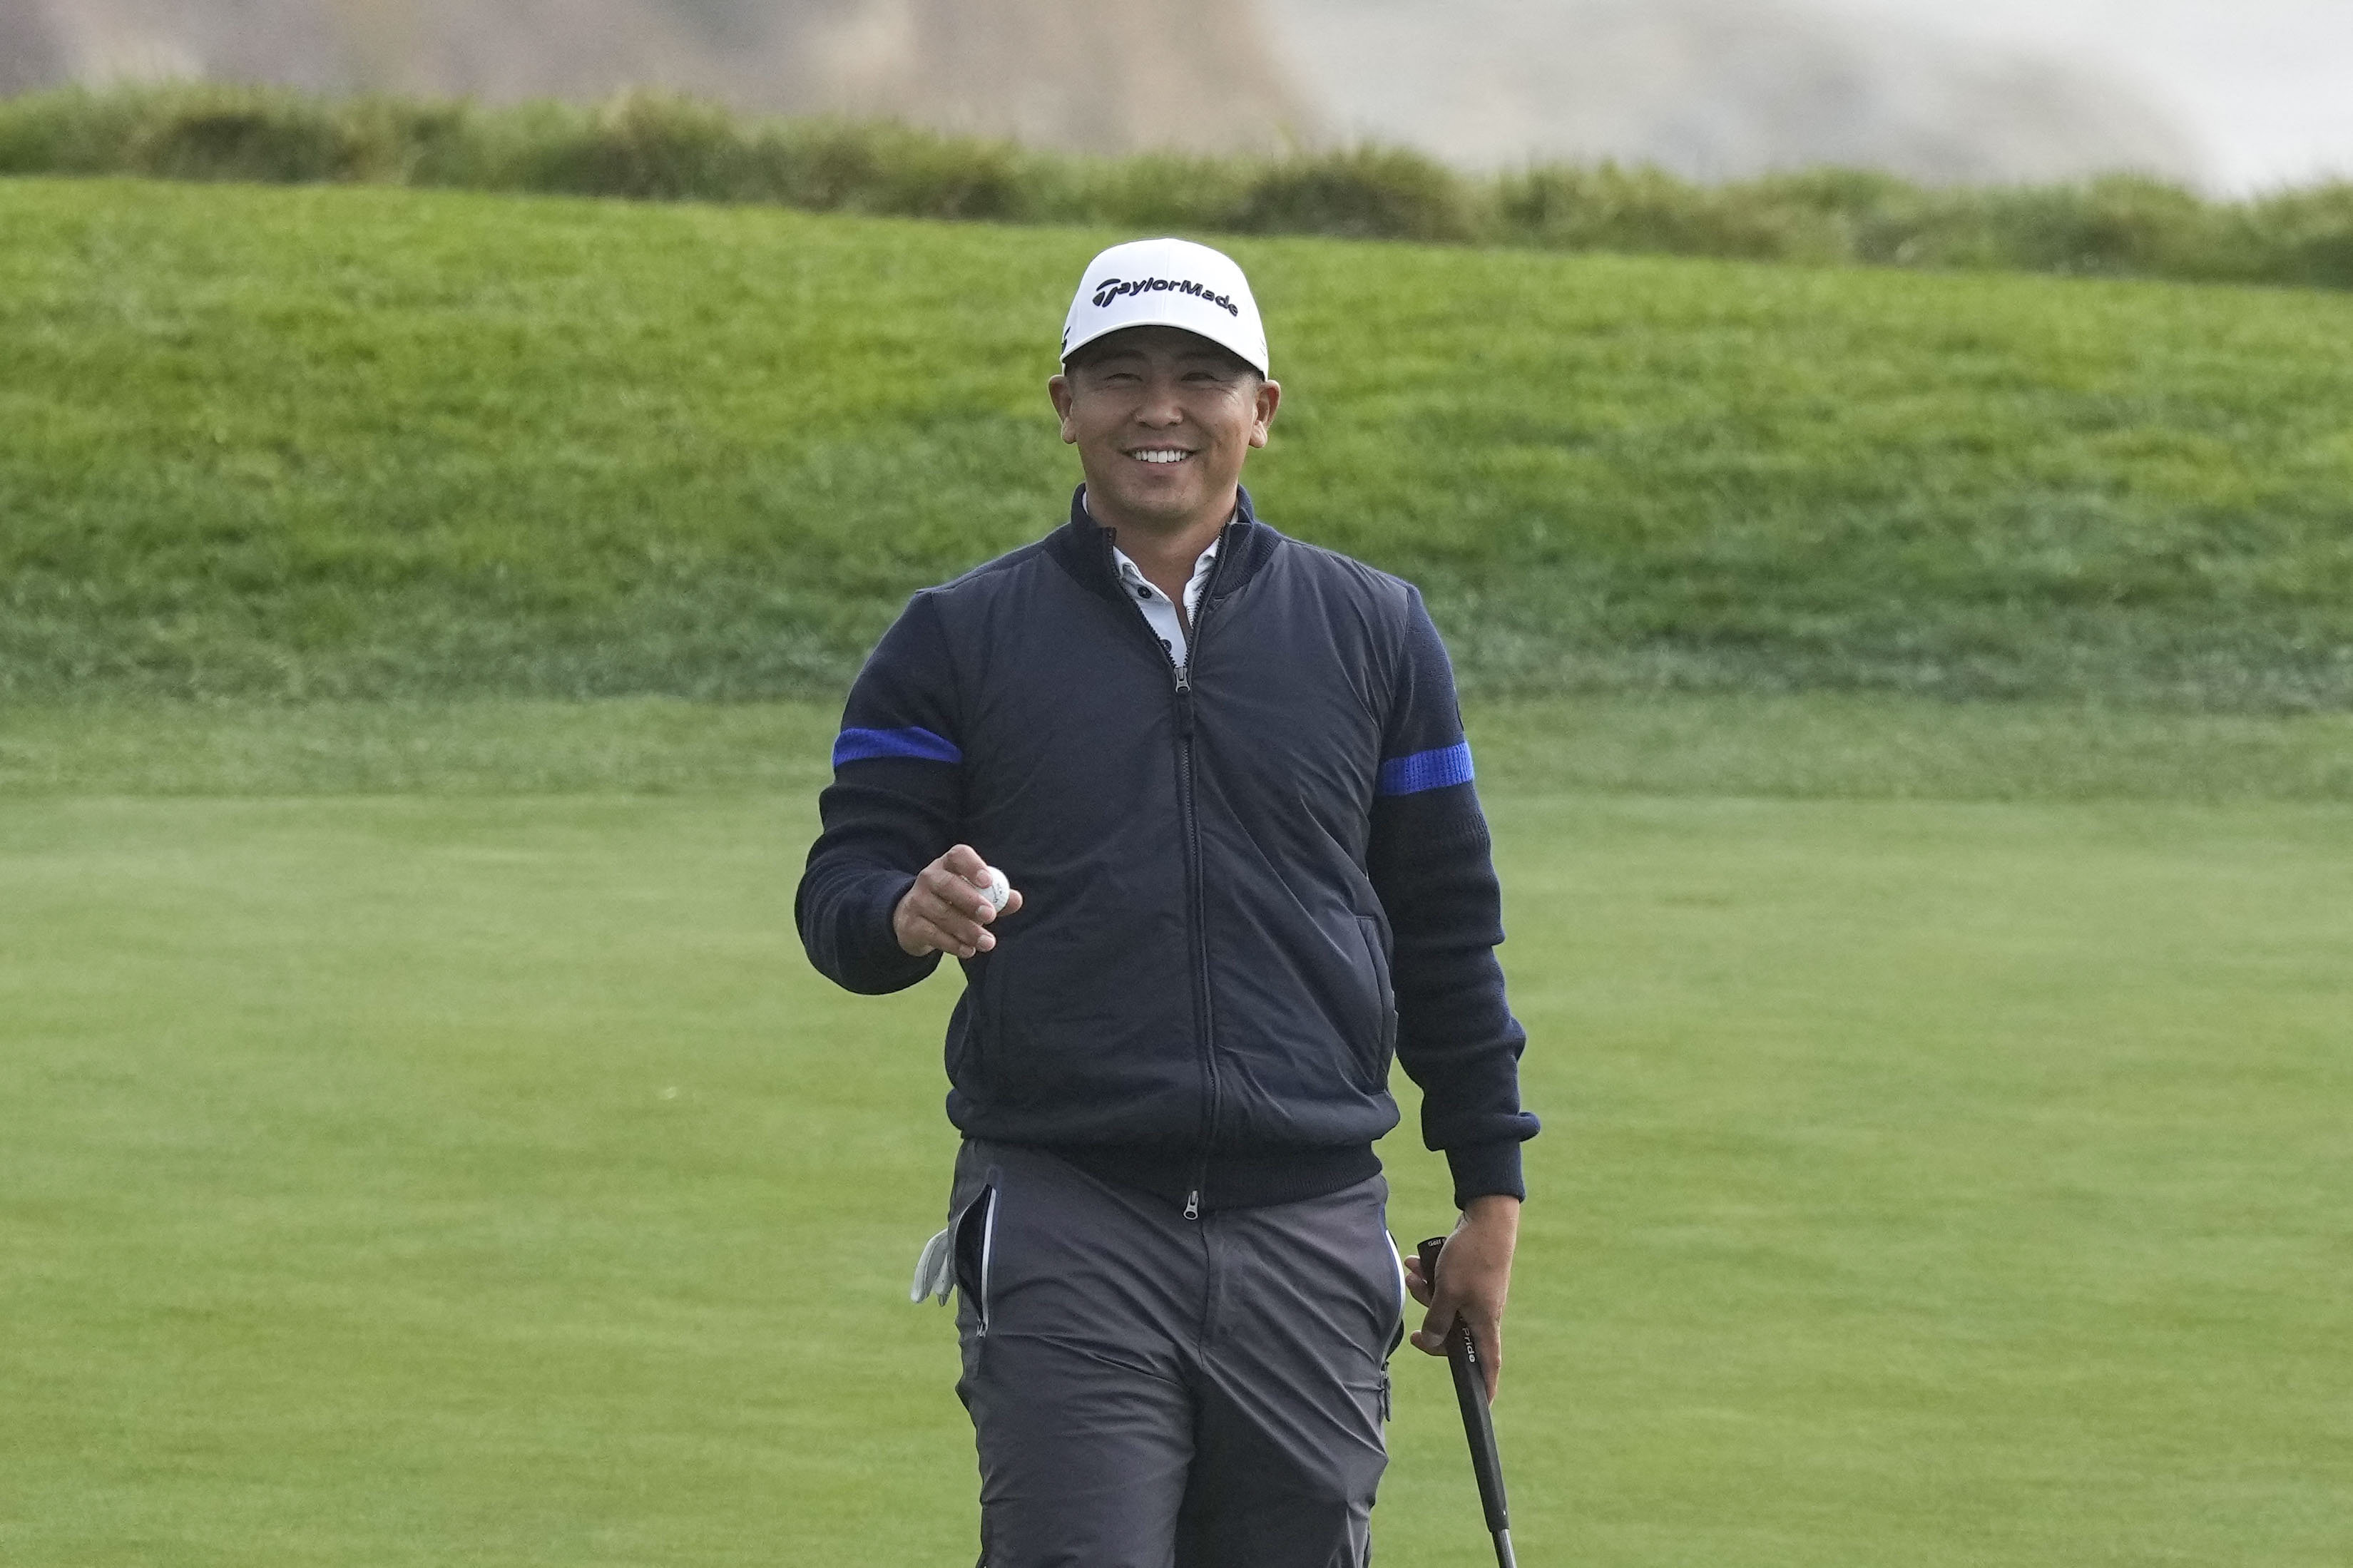 PGA Tour Pebble Beach Pro-Am highlights state of golf's world ranking system, Asian Tour boss says | South China Morning Post